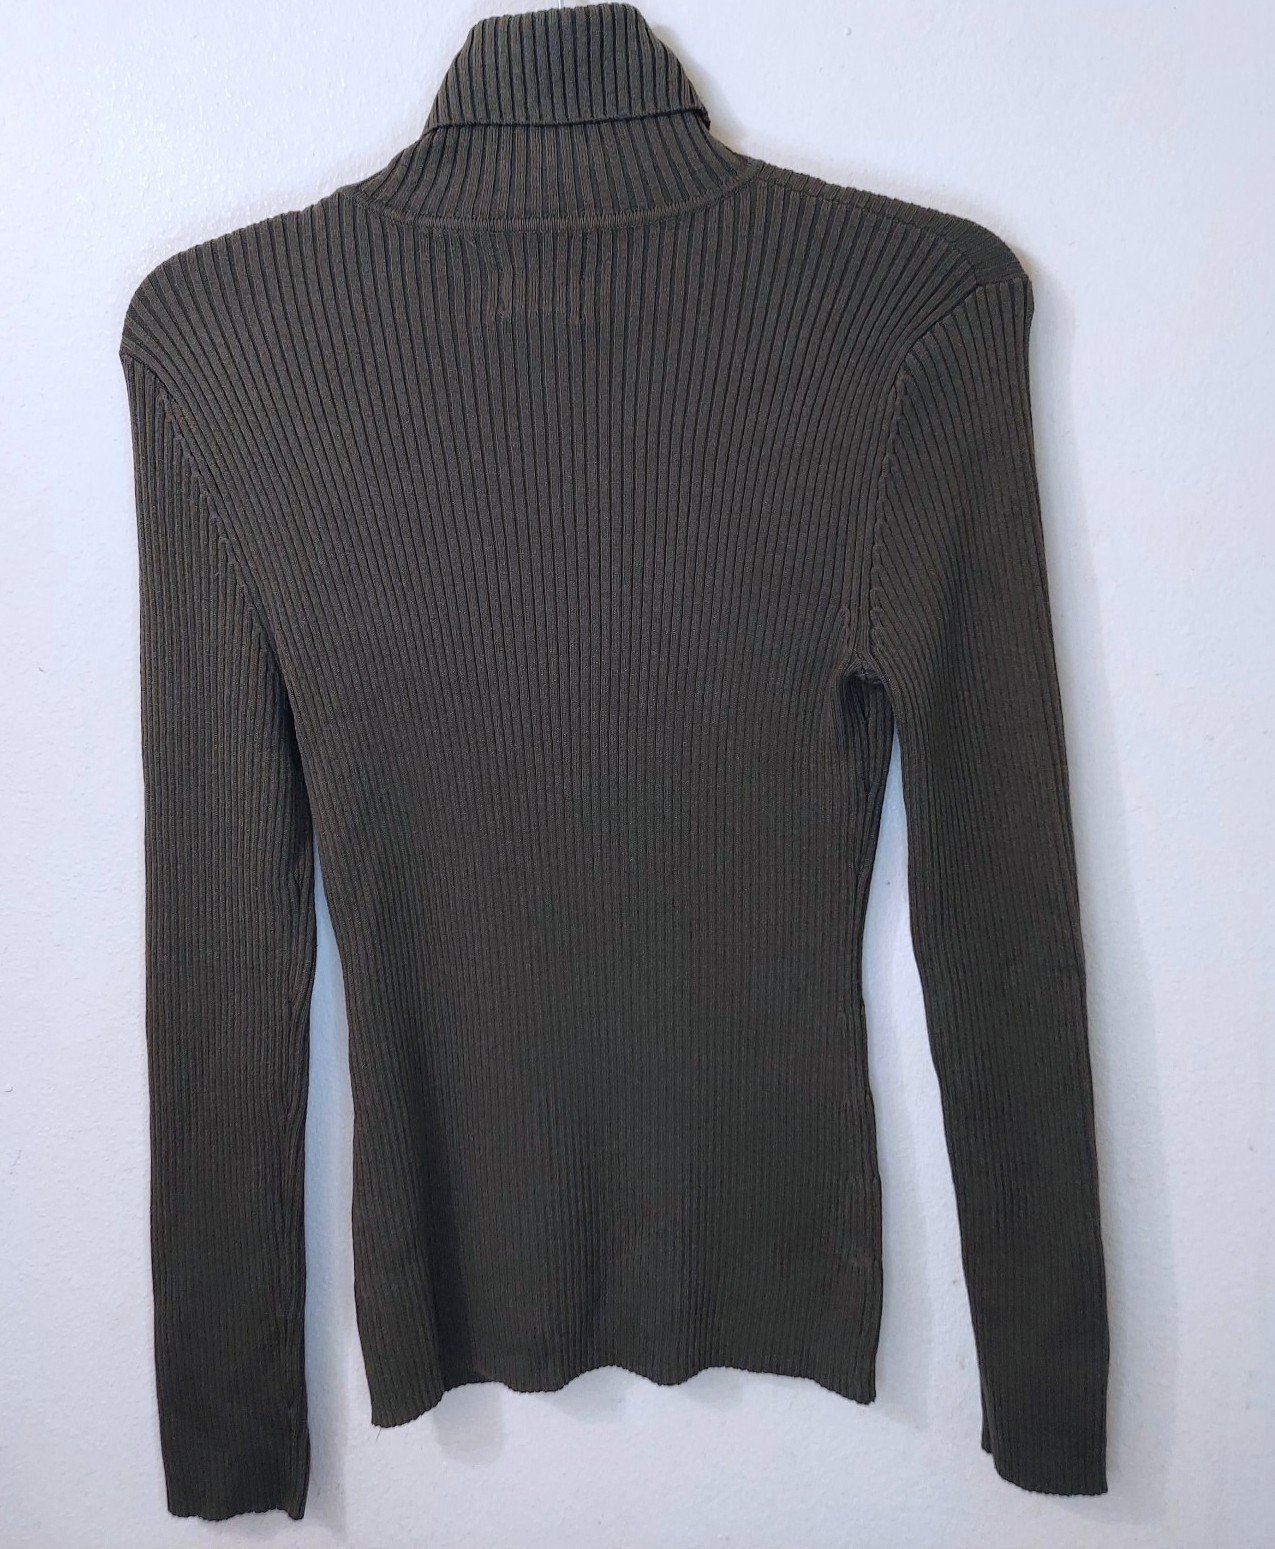 Promotions  Chico´s Turtleneck Sweater Olive Green Size 8 lOPMuqewl Great